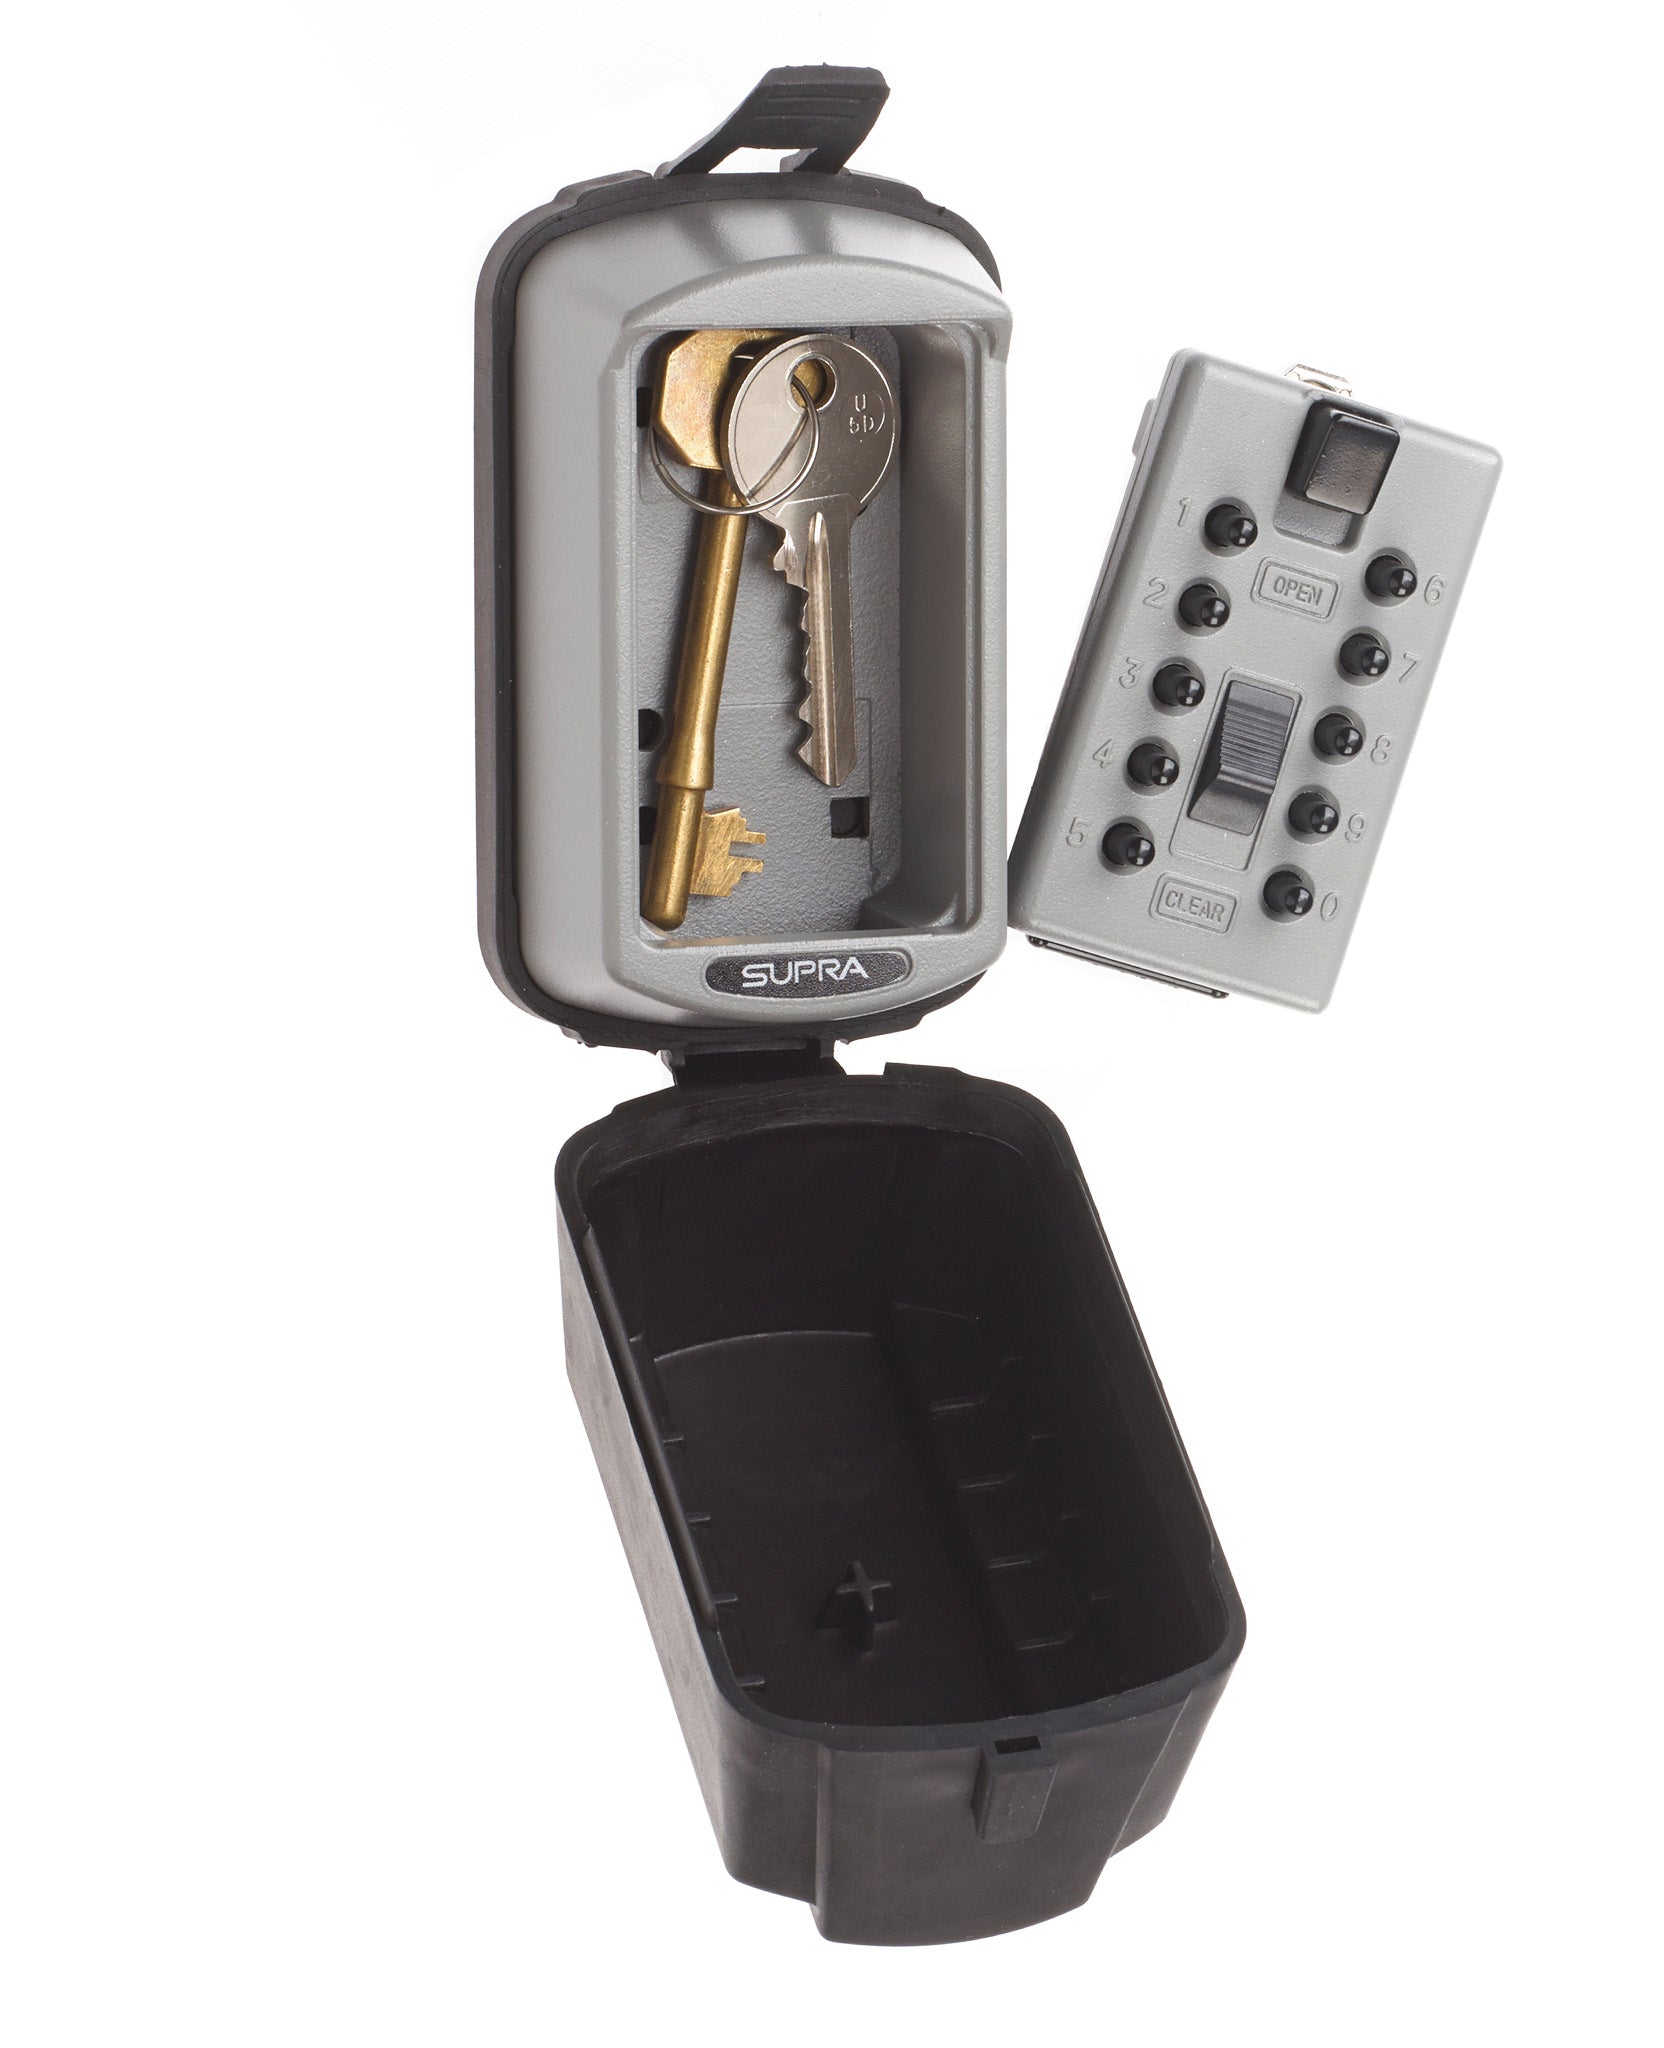 open Supra plant and machinery slimline key safe with detachable front and 2 keys inside